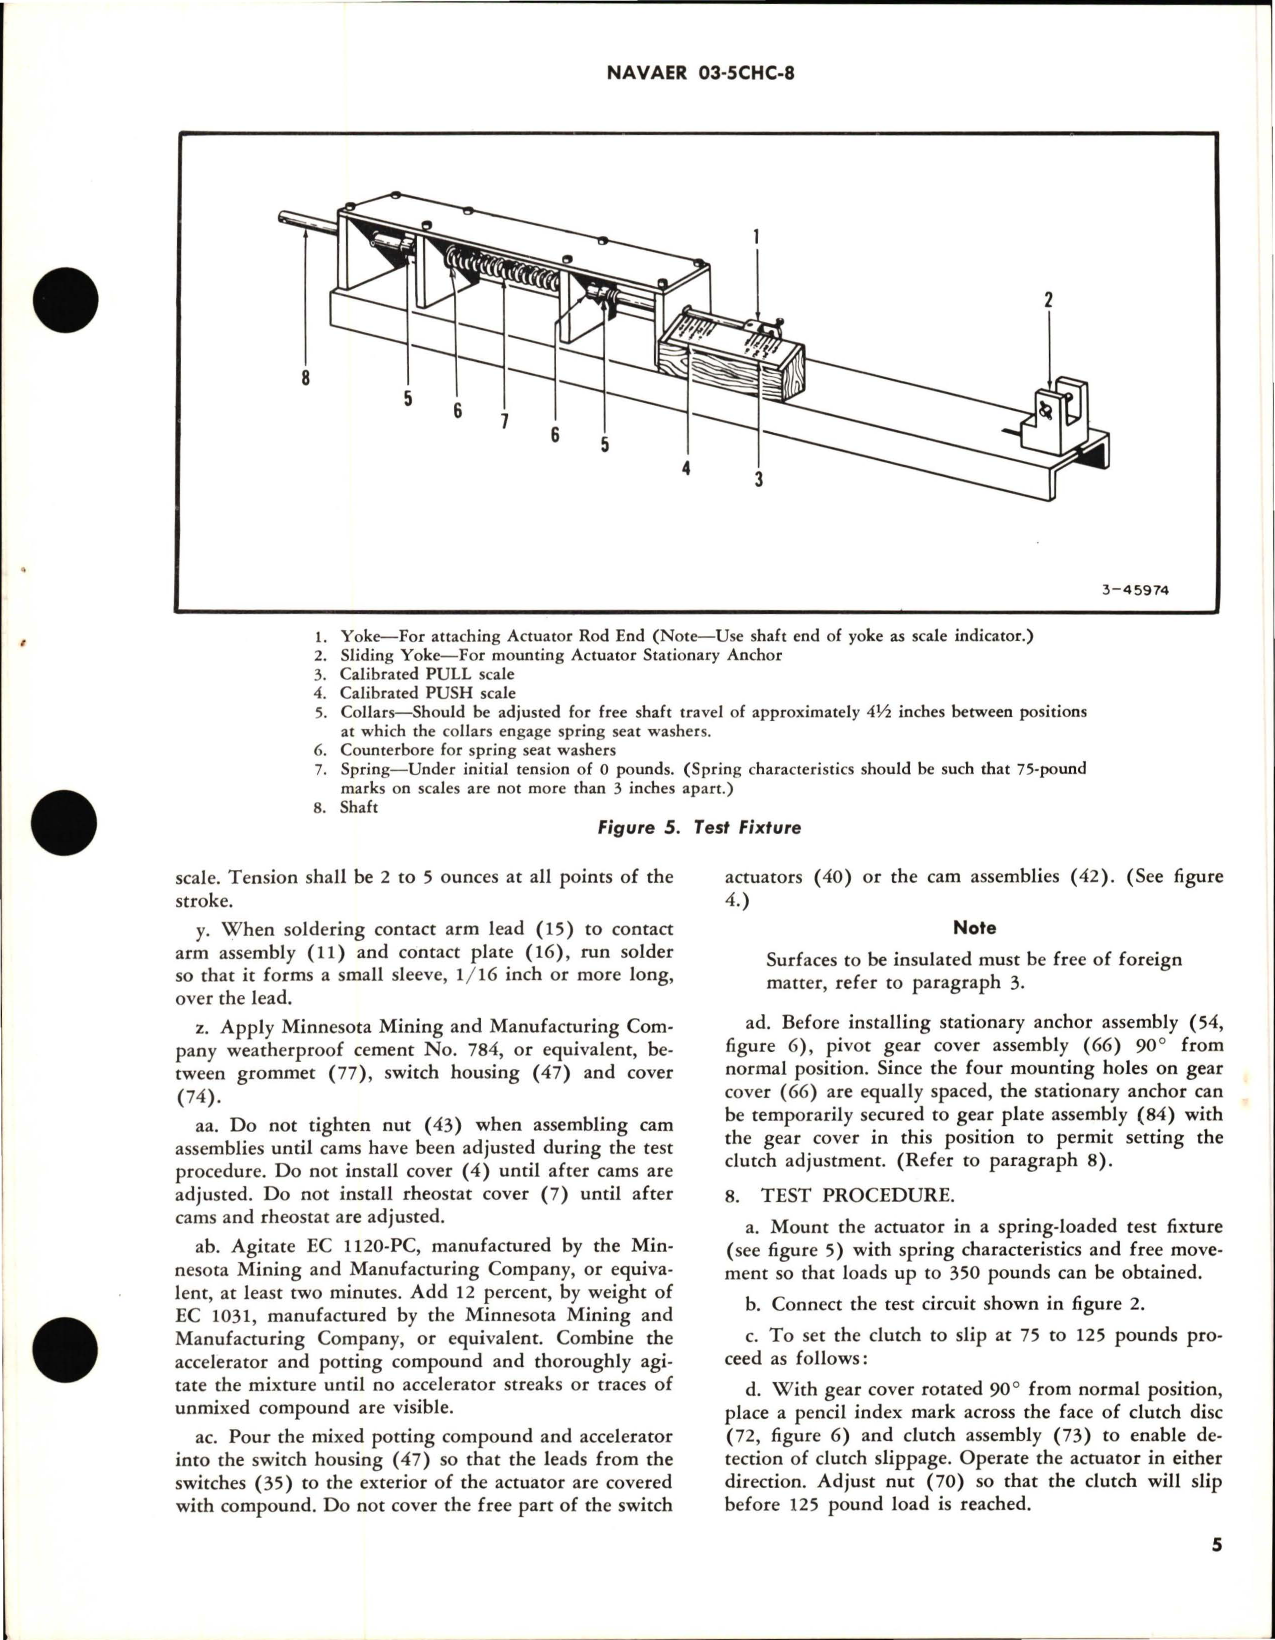 Sample page 5 from AirCorps Library document: Overhaul Instructions with Illustrated Parts Breakdown for Linear Actuator - KYLC 4694-2 